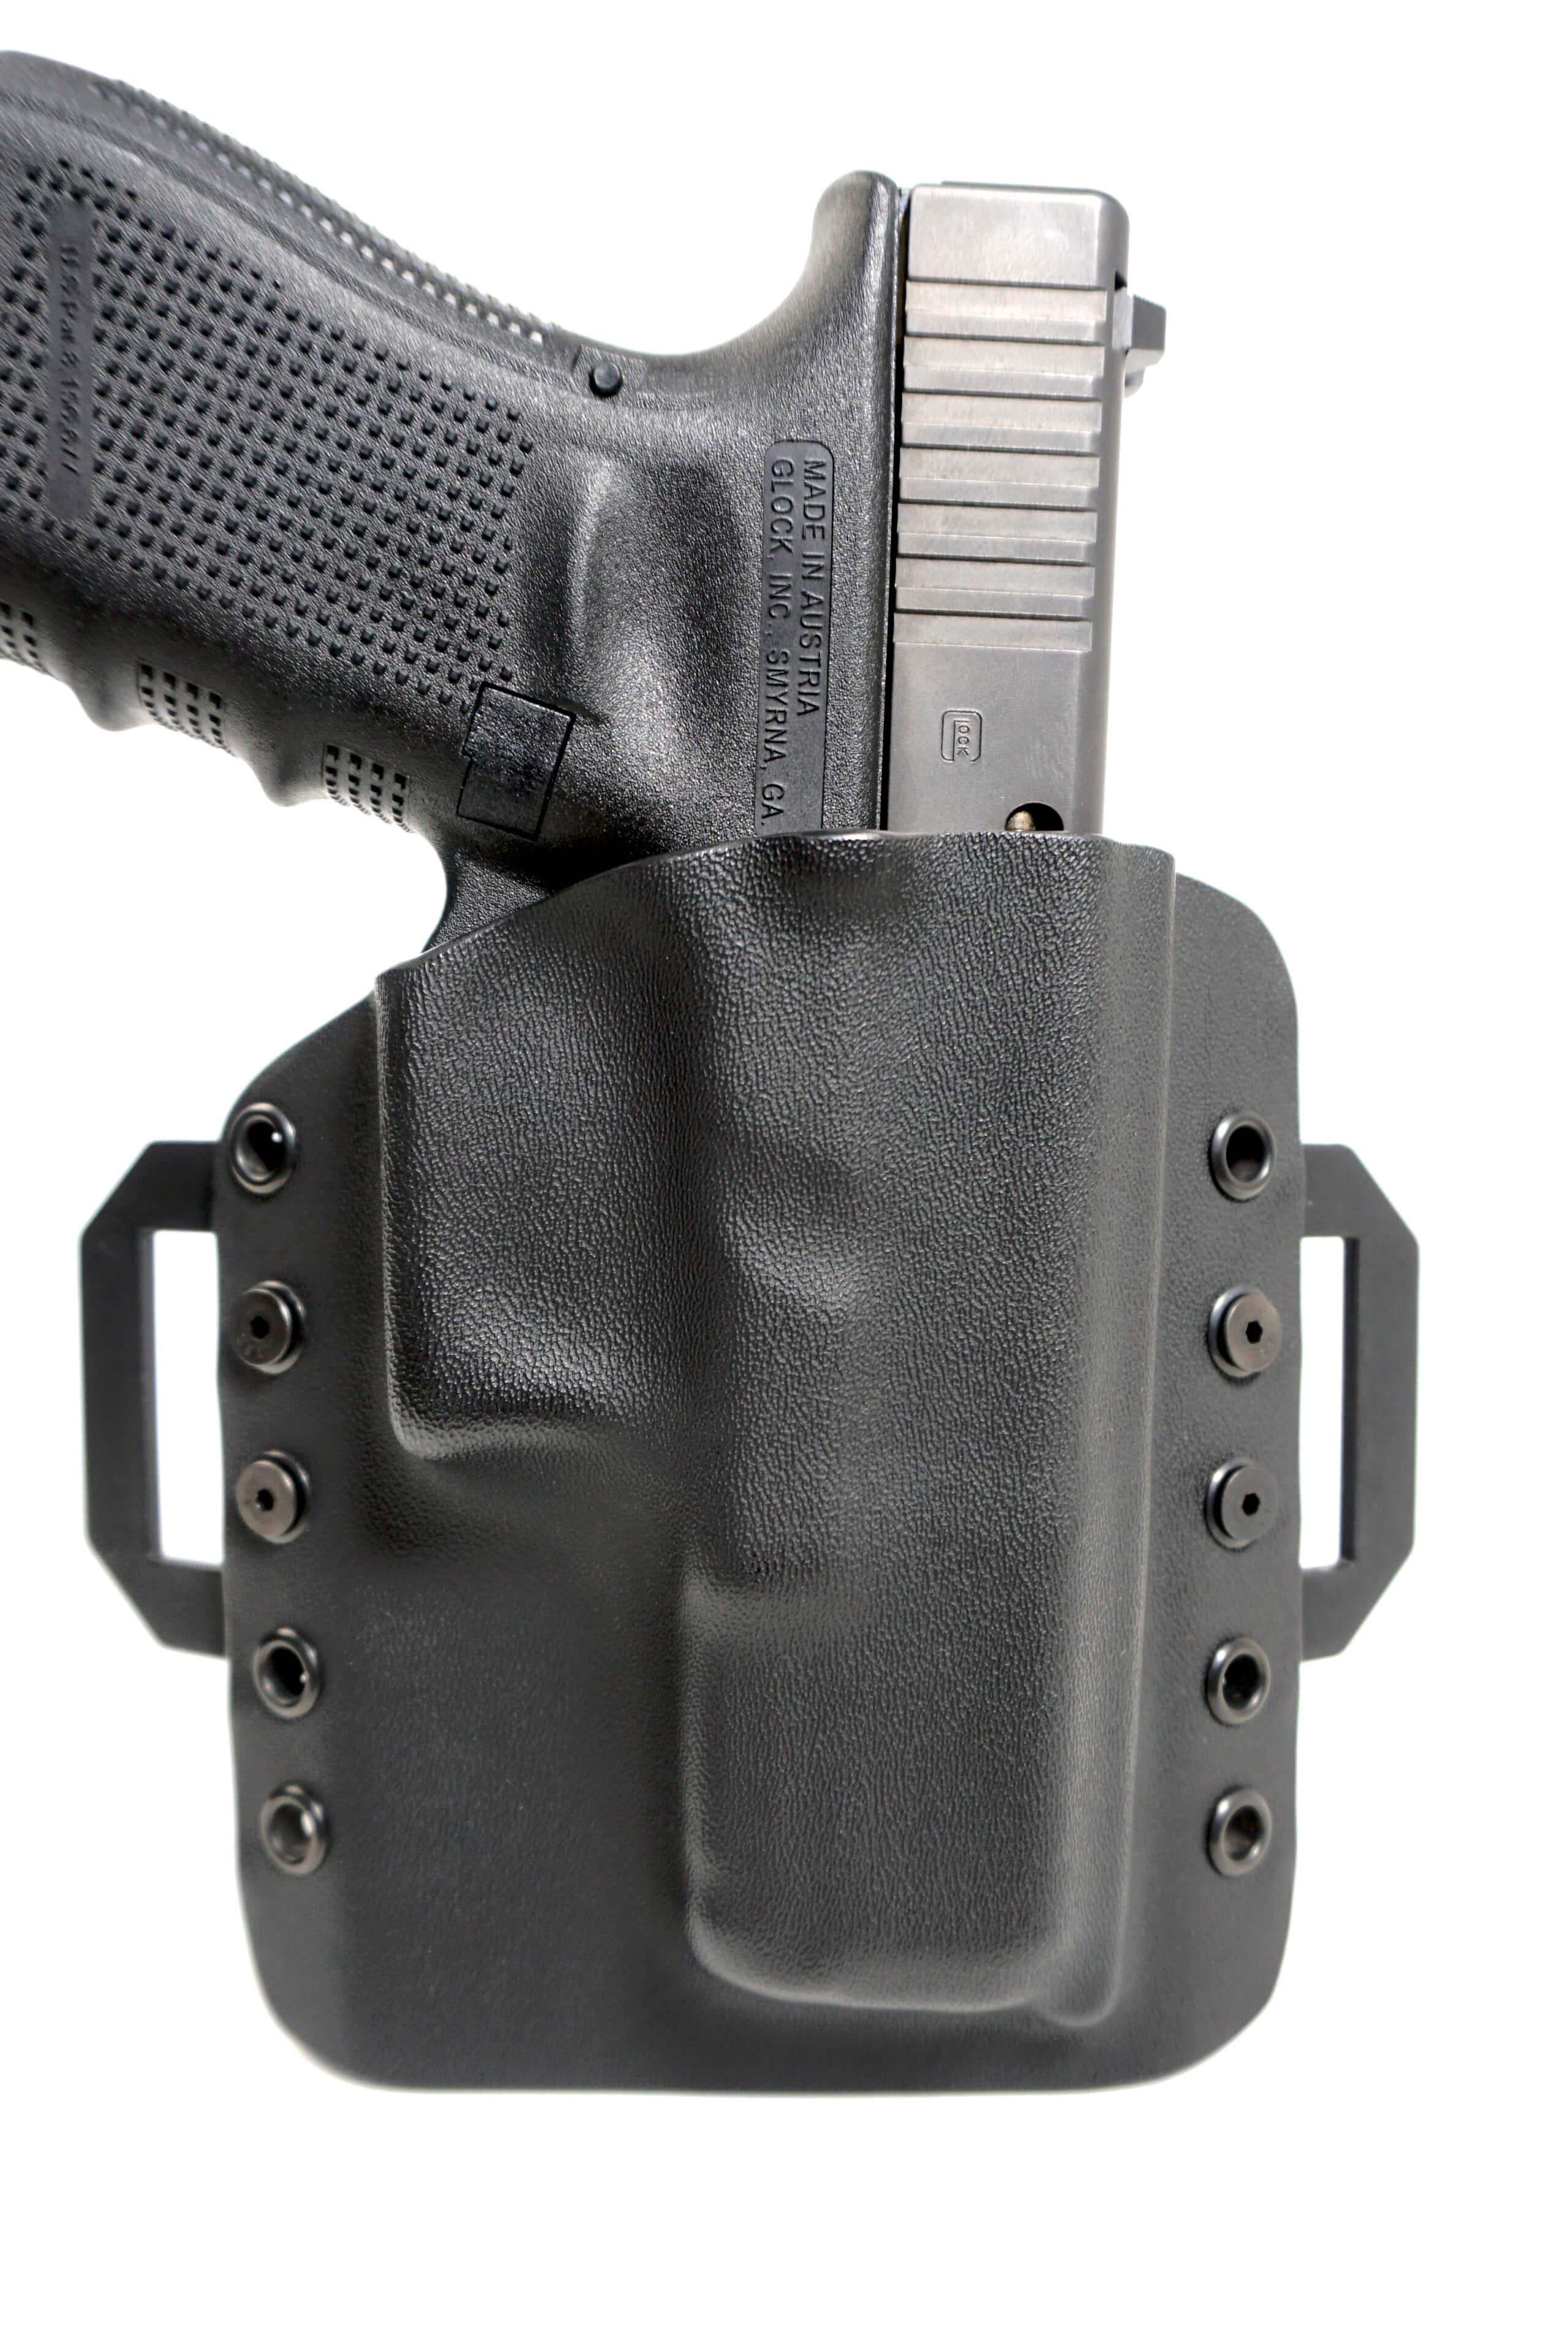 Details about   Kel Tec Pmr 30 owb right hand carry Kydex Holster with paddle mount black. 